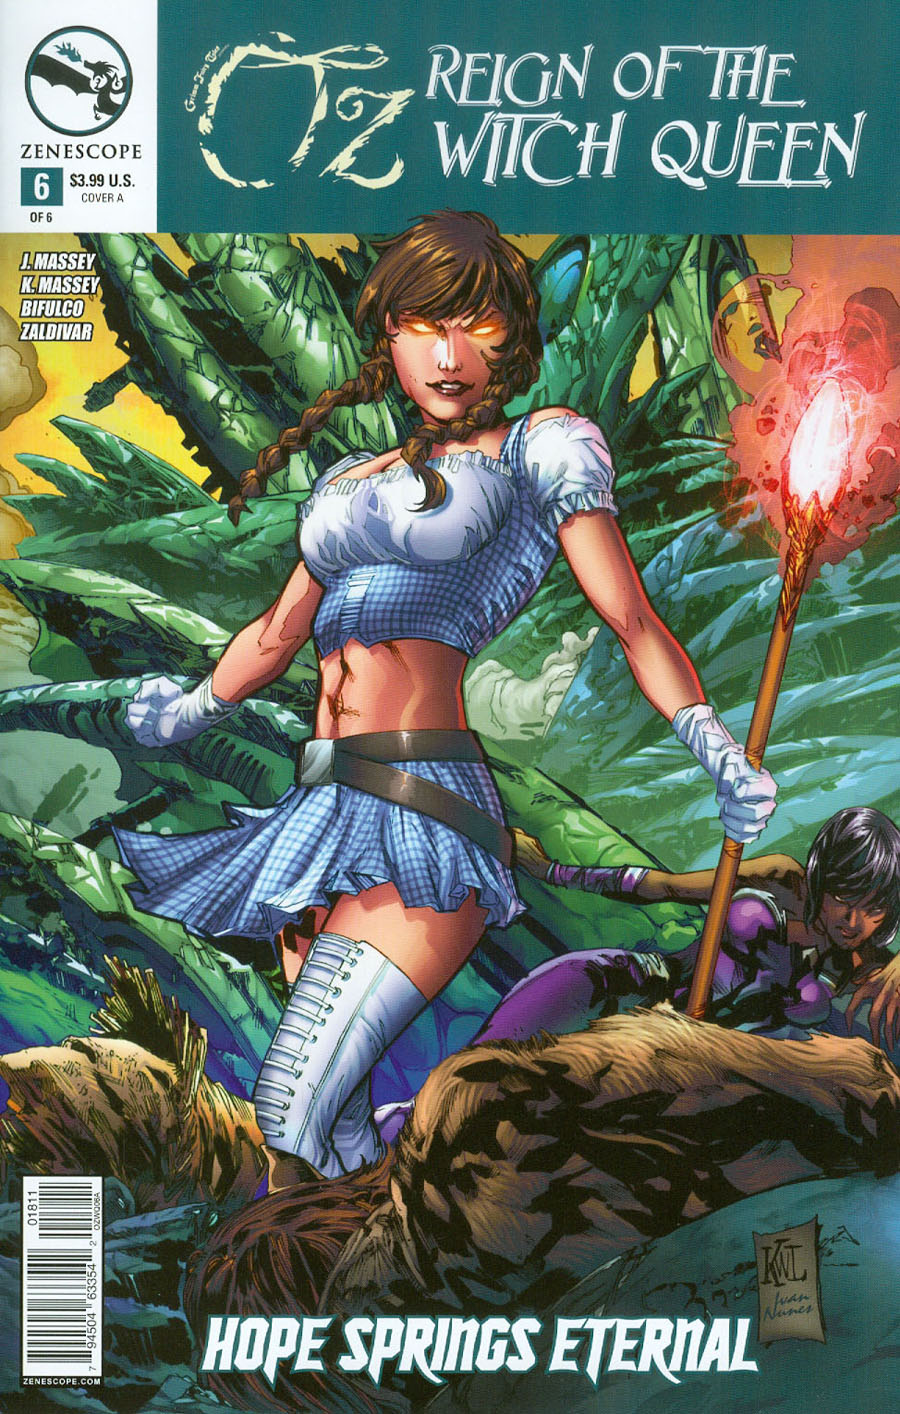 Grimm Fairy Tales Presents Oz Reign Of The Witch Queen #6 Cover A Ken Lashley